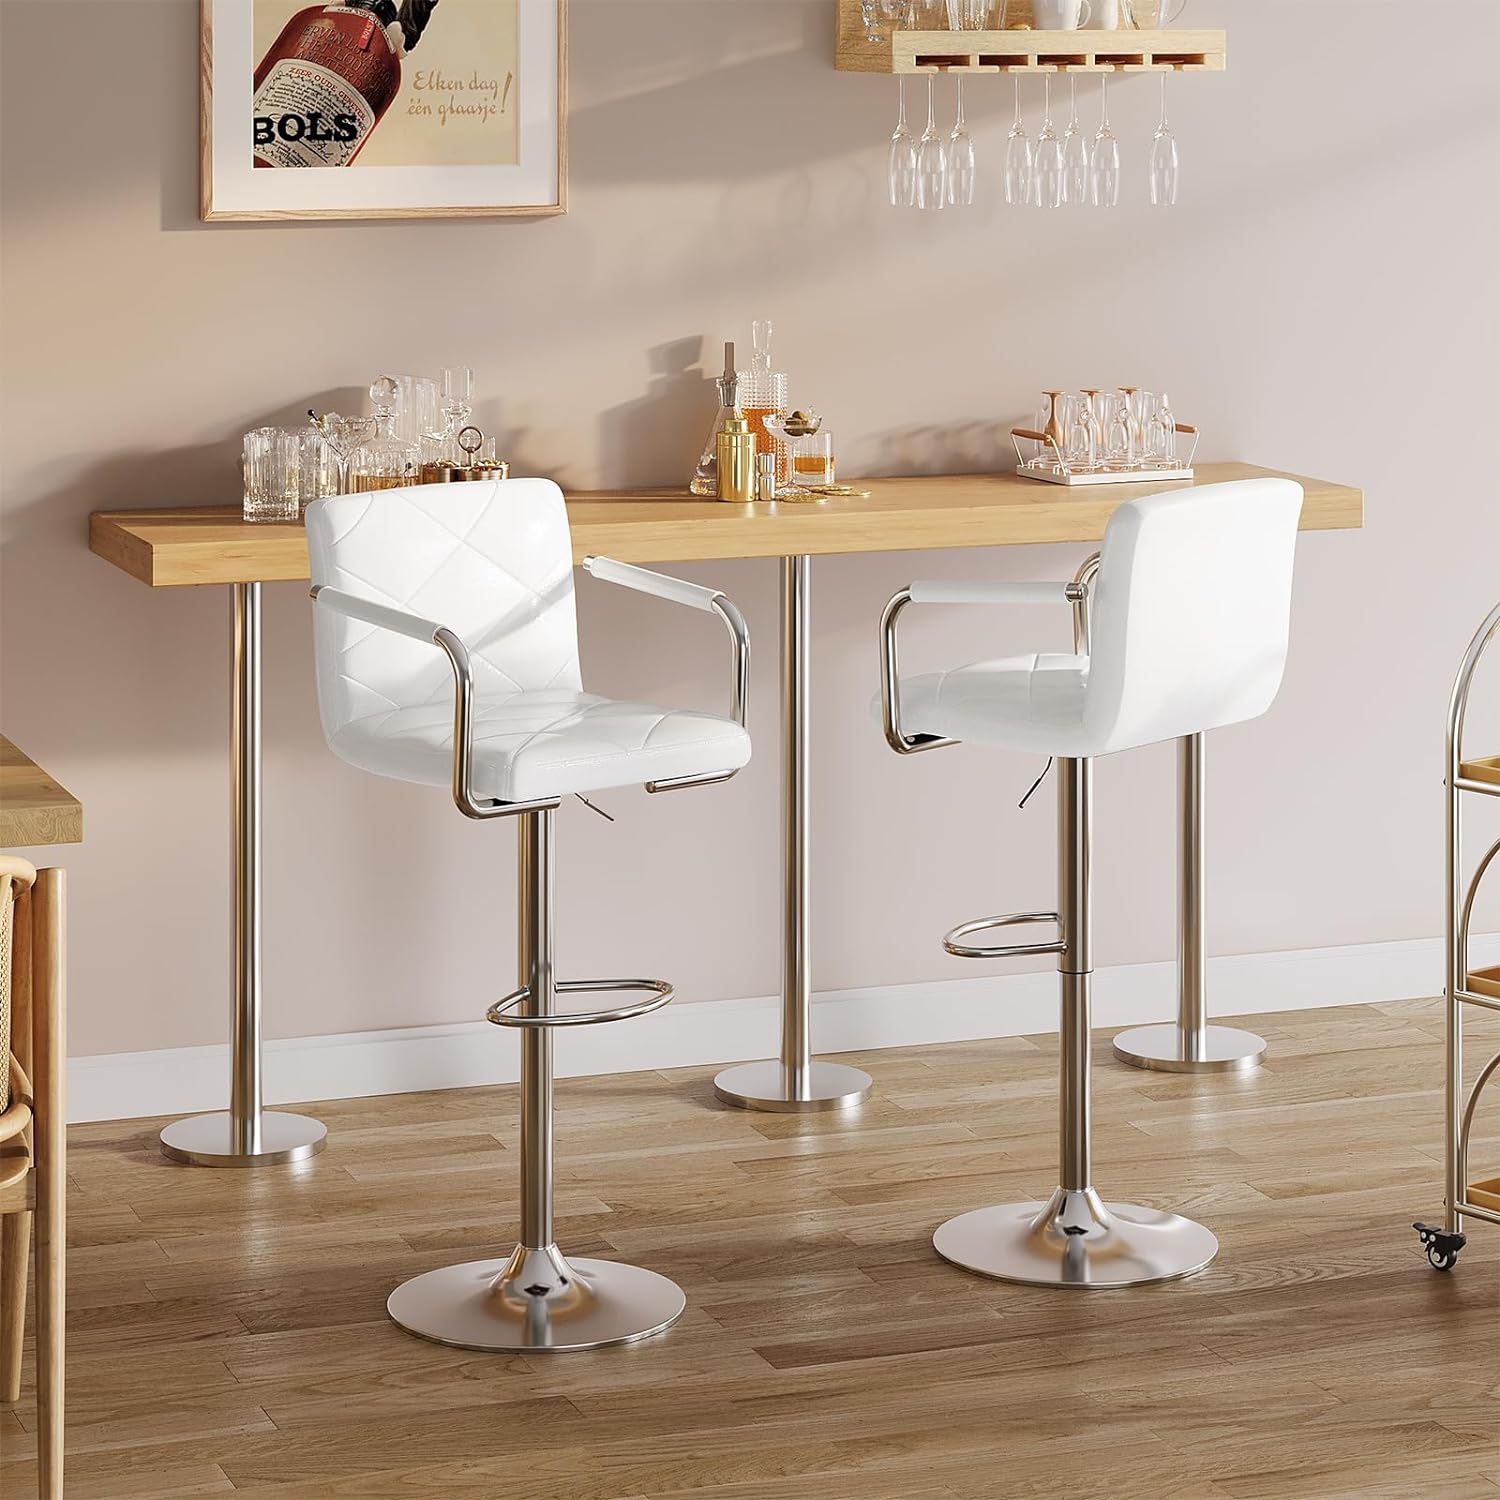 Gizoon TB10 Adjustable Counter Bar Chairs Set for 2